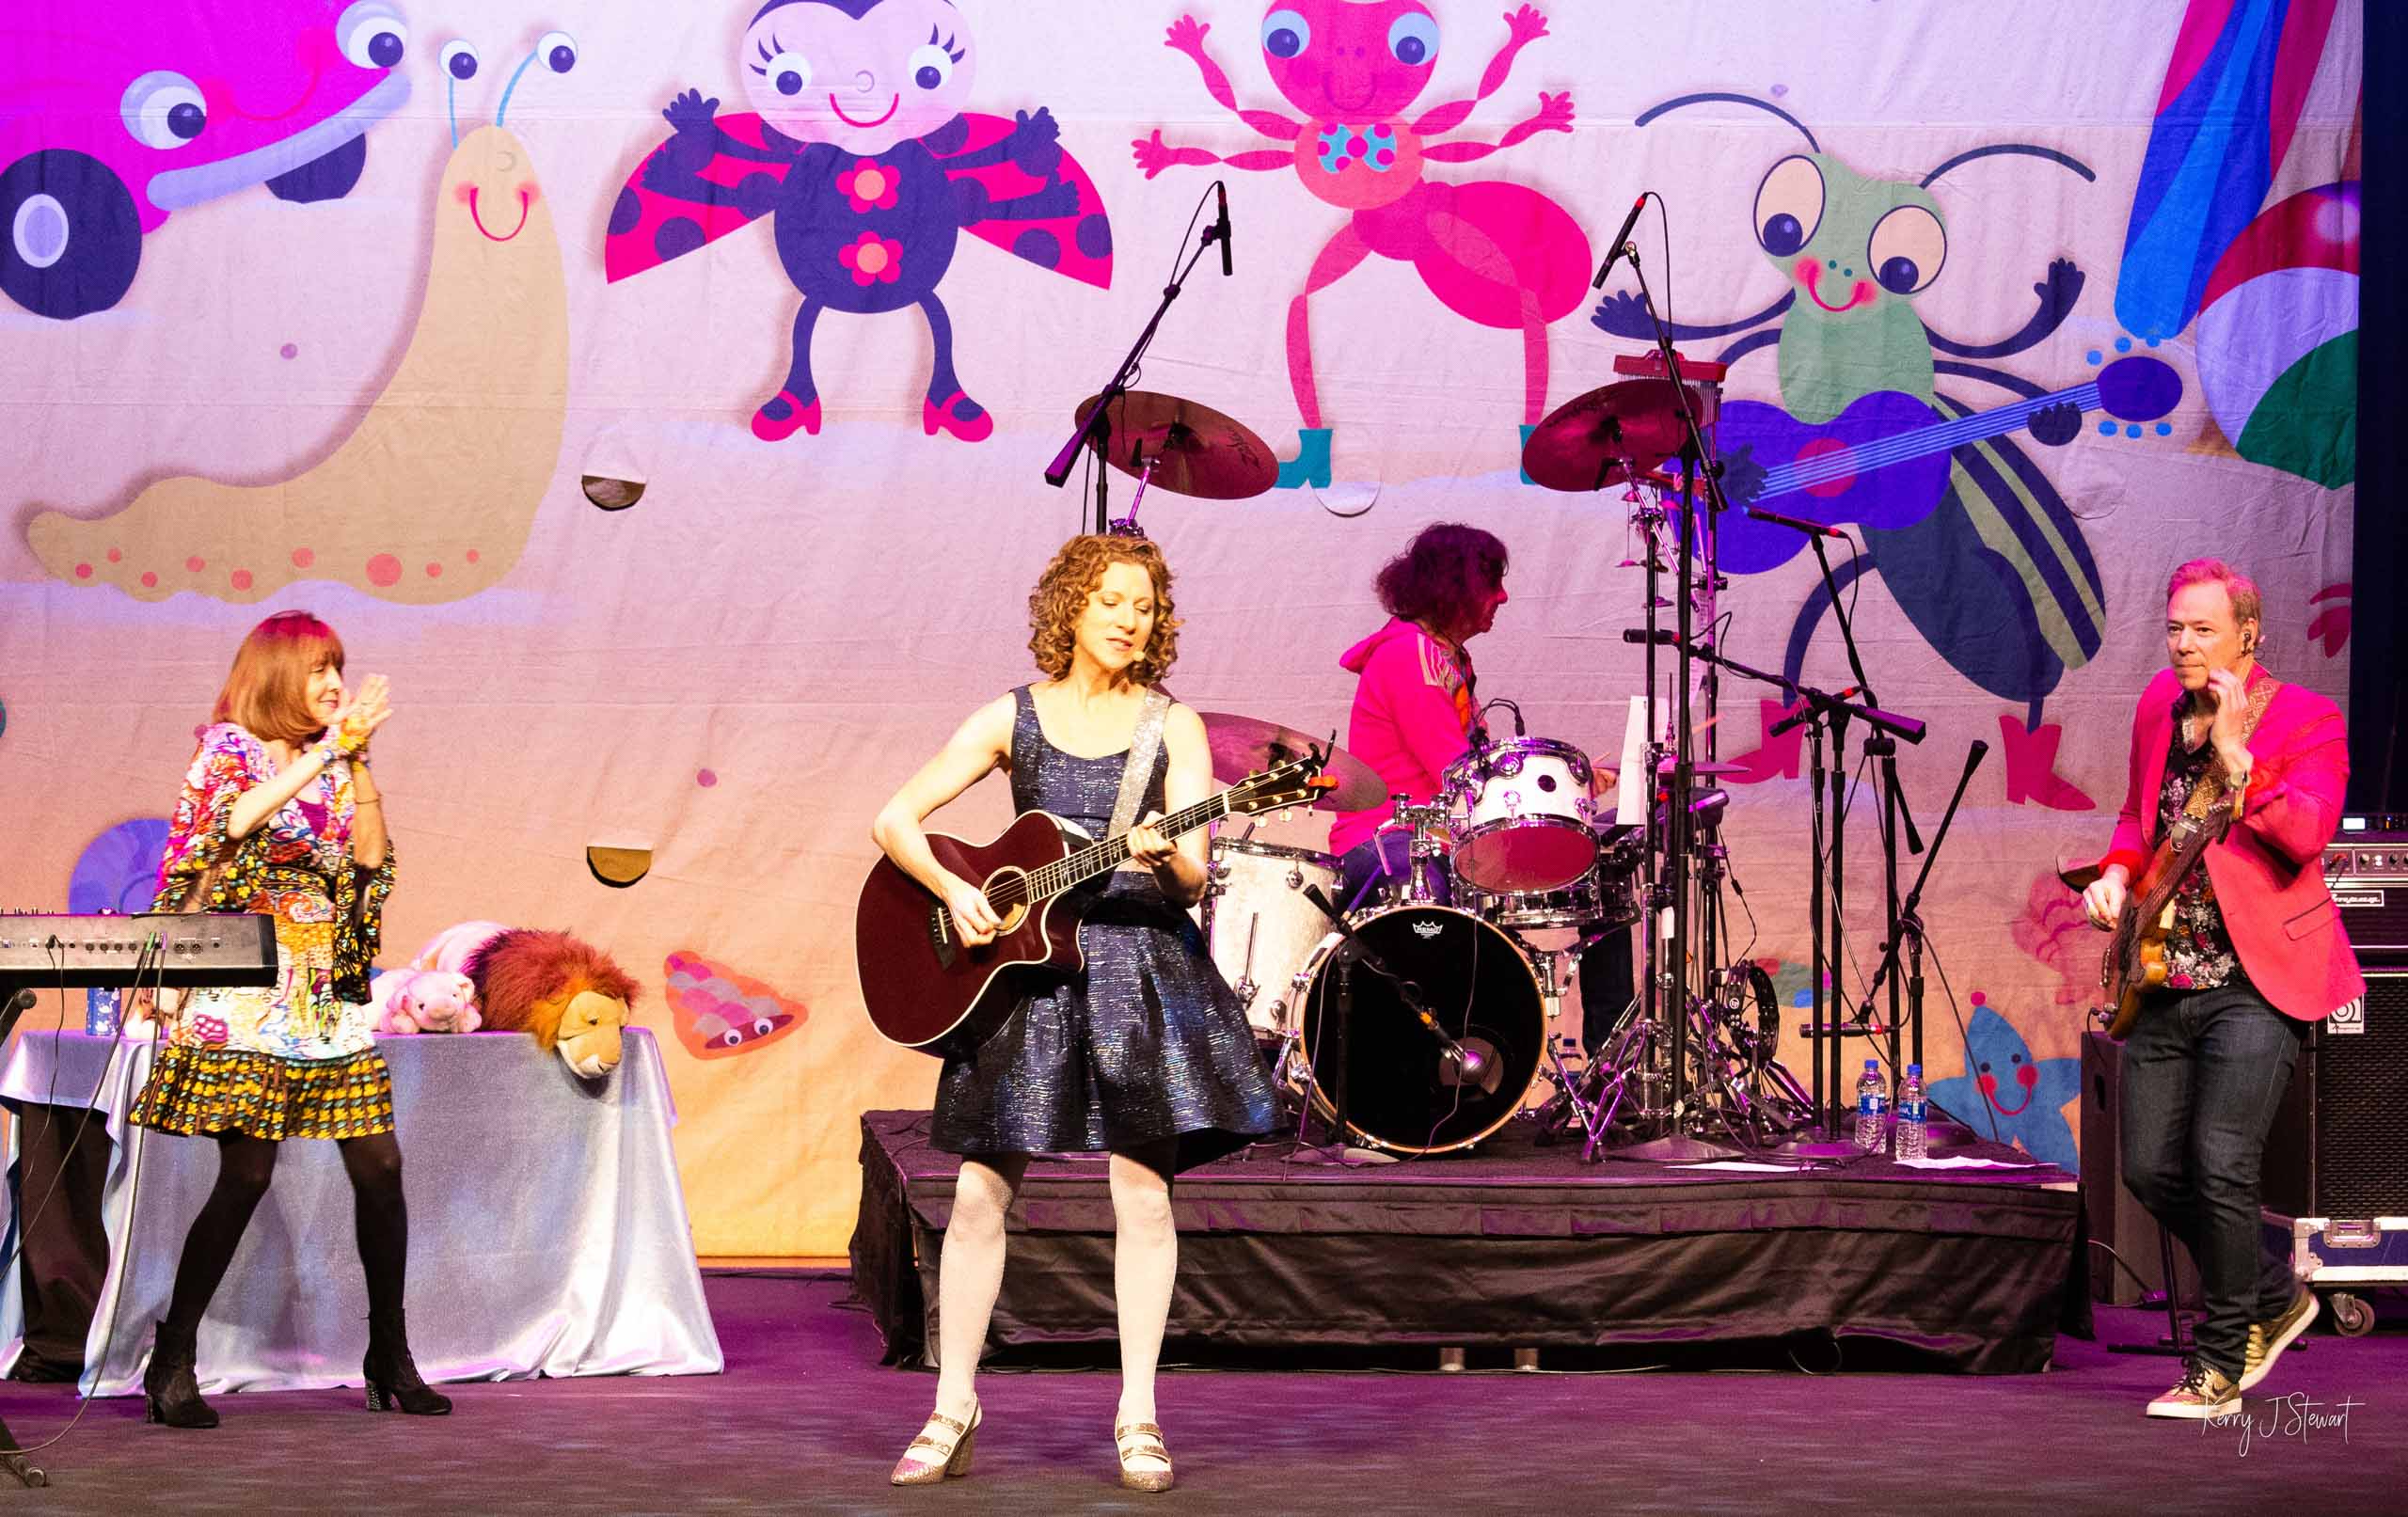 adult musicians performing on stage for kids.